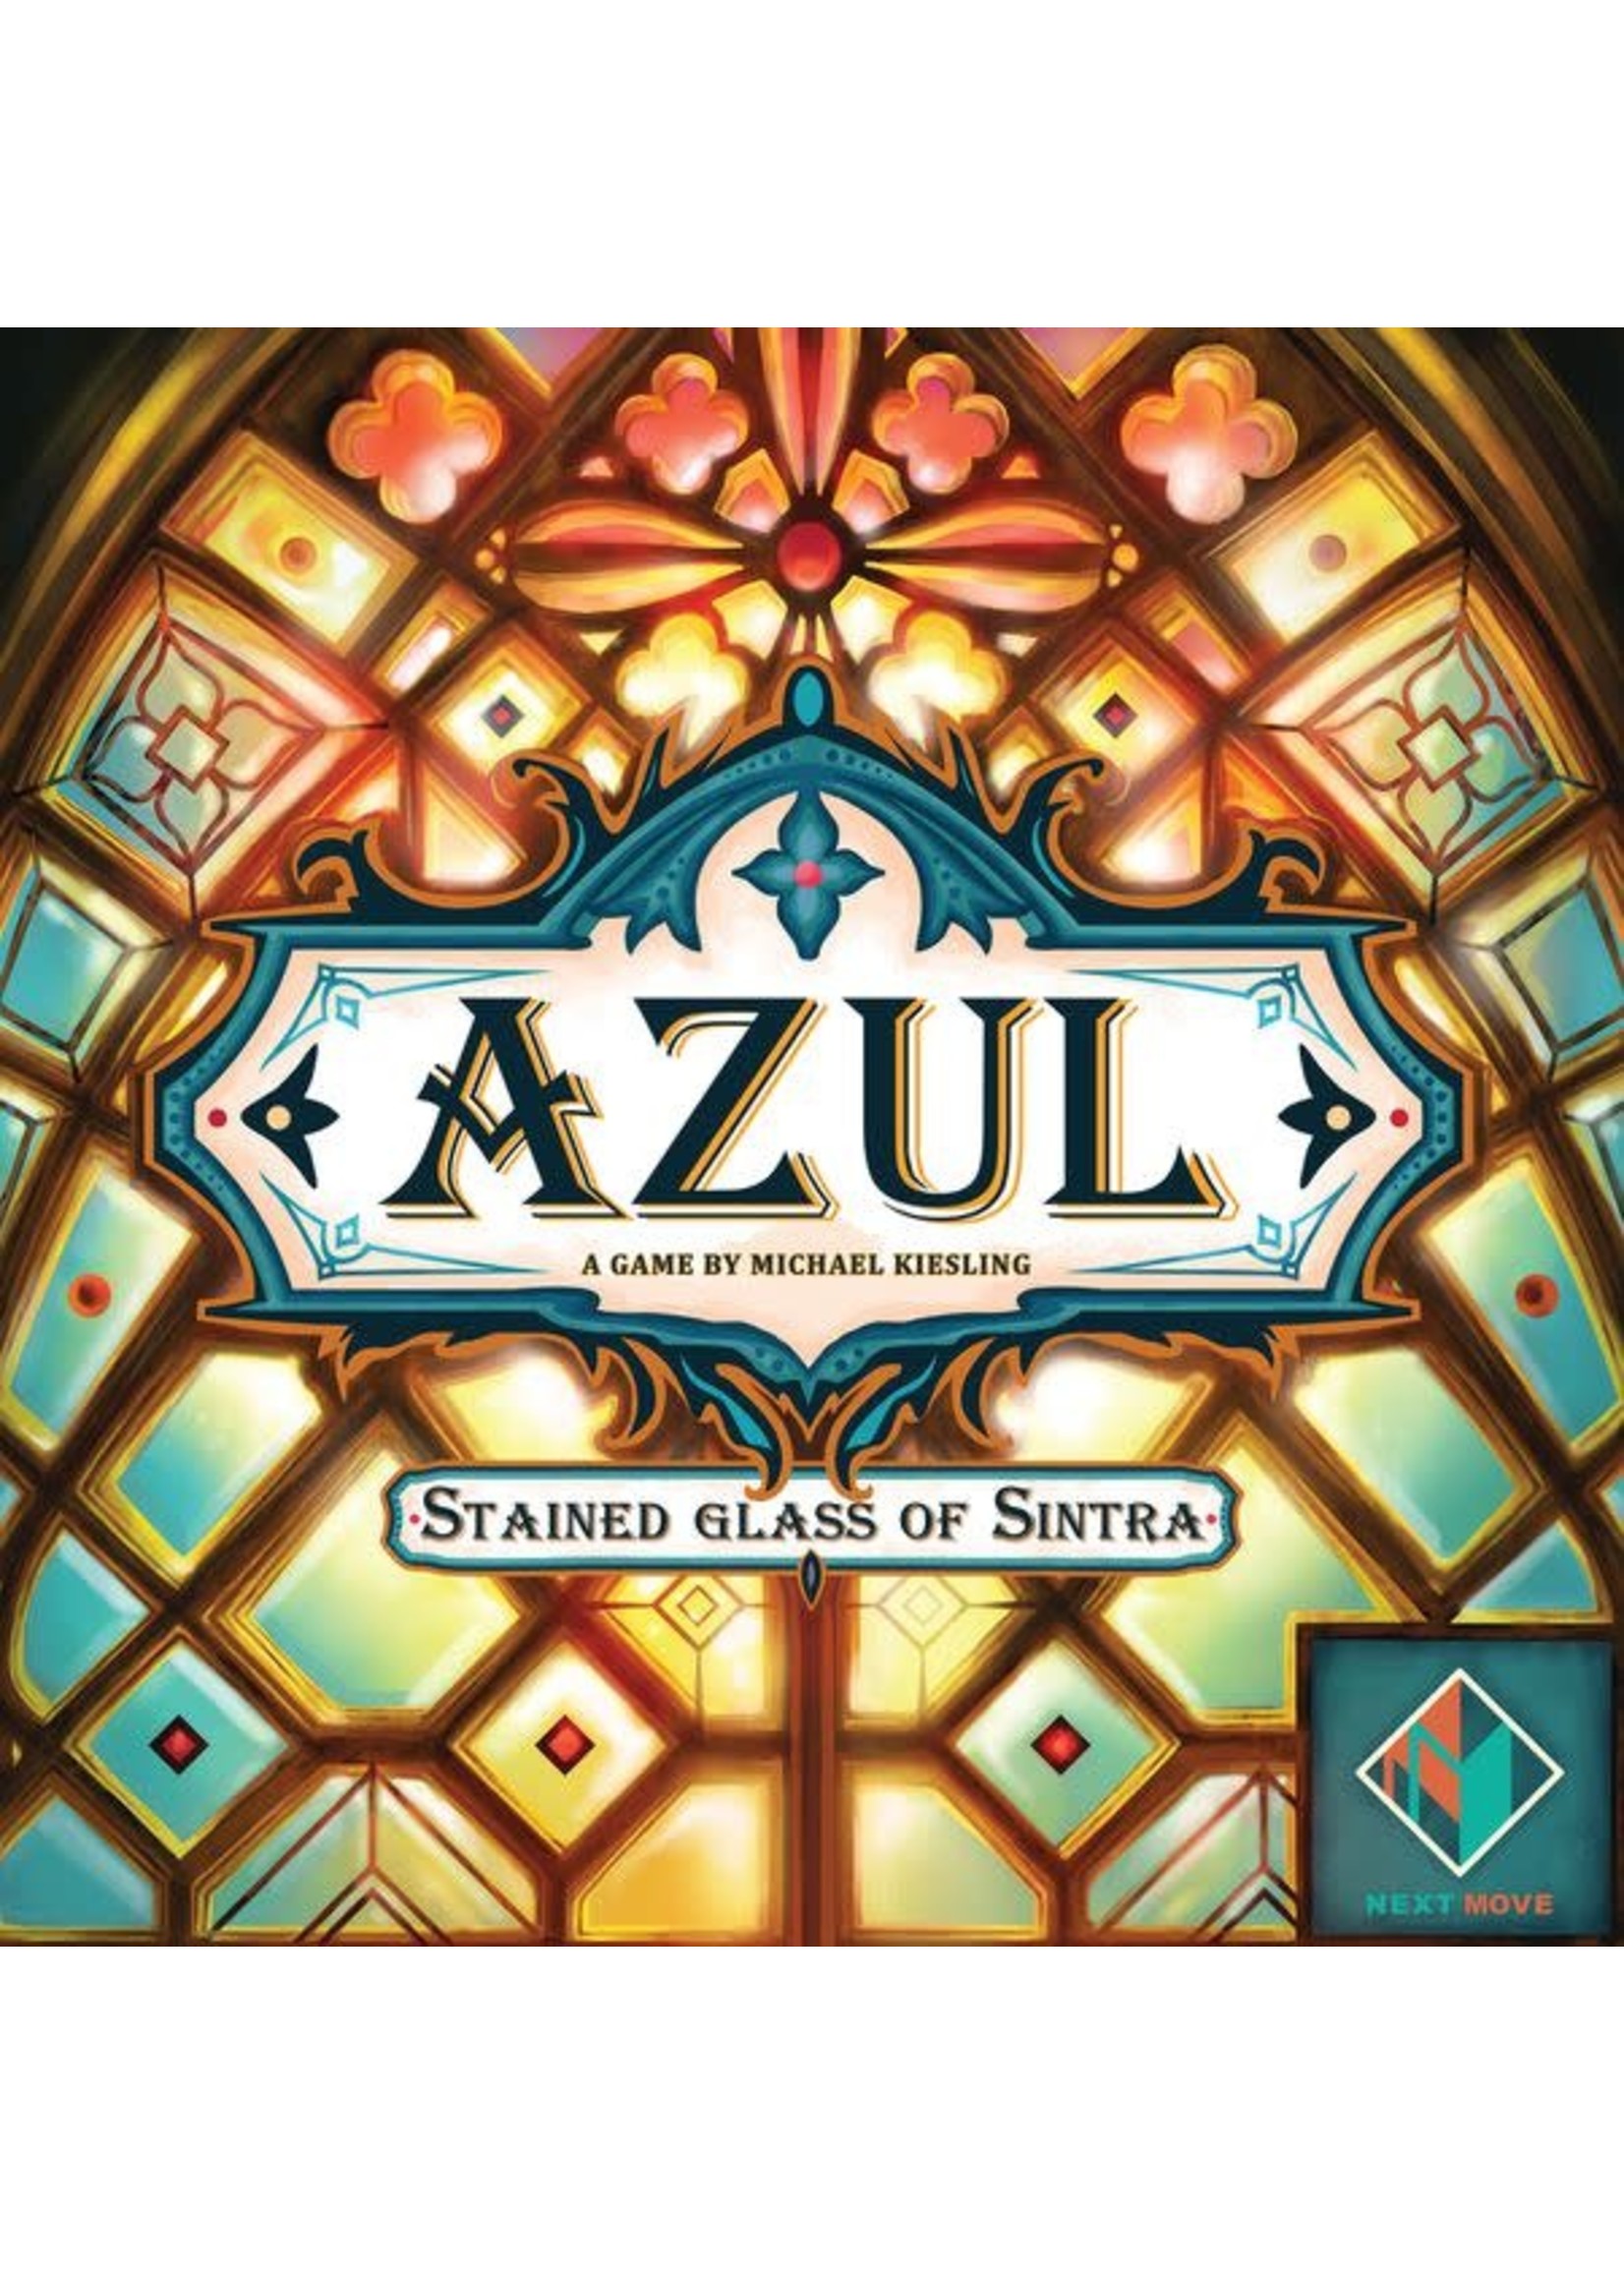 Next Move Games Azul Stained Glass of Sintra